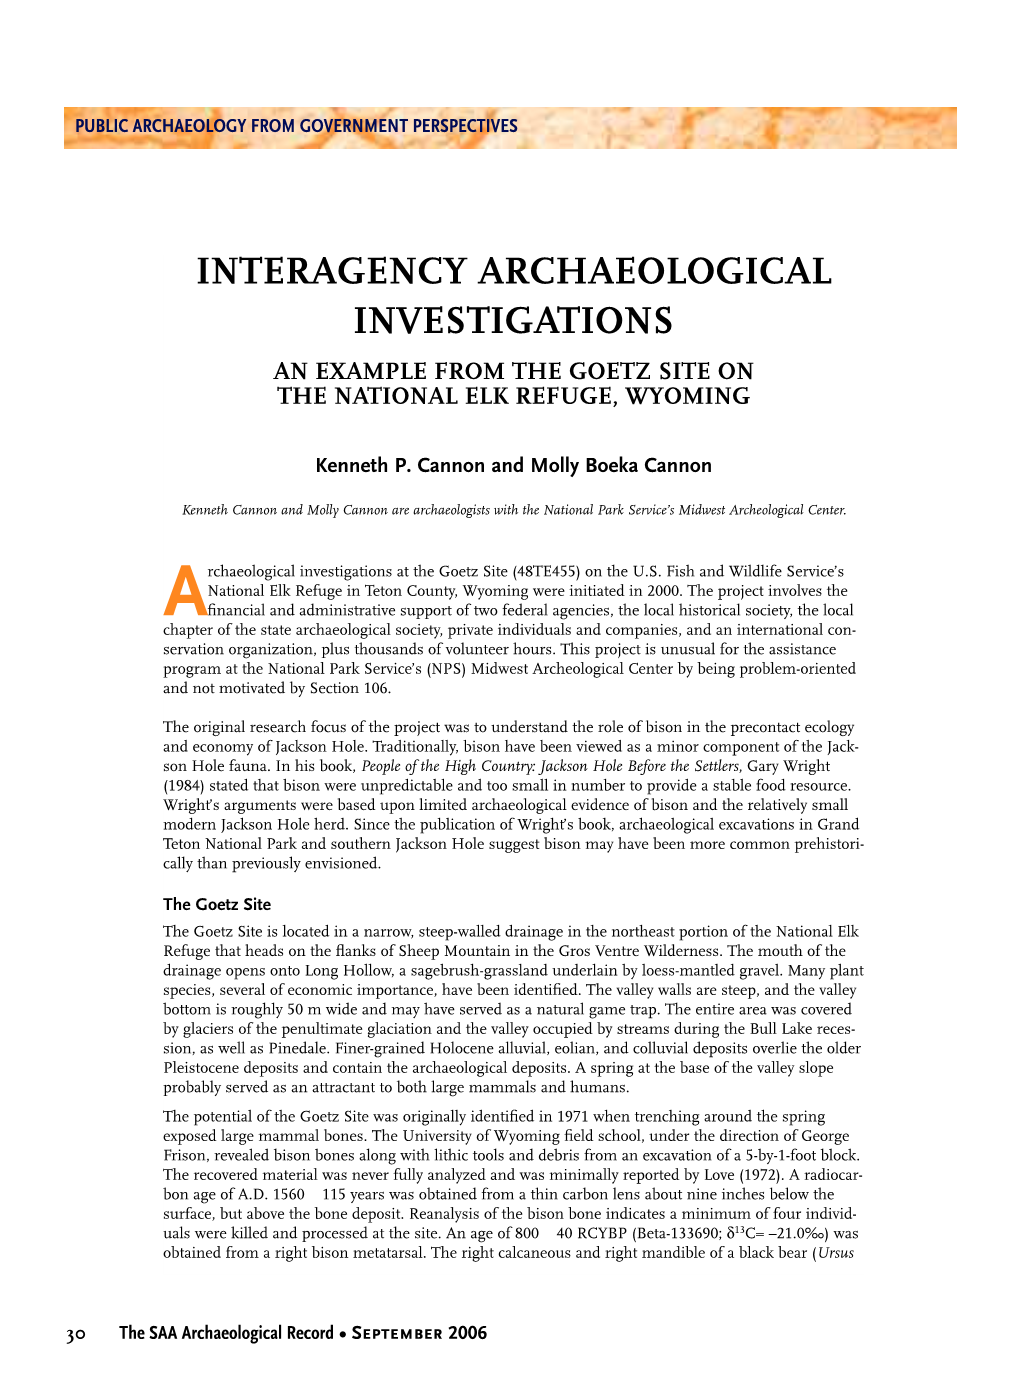 Interagency Archaeological Investigations an Example from The